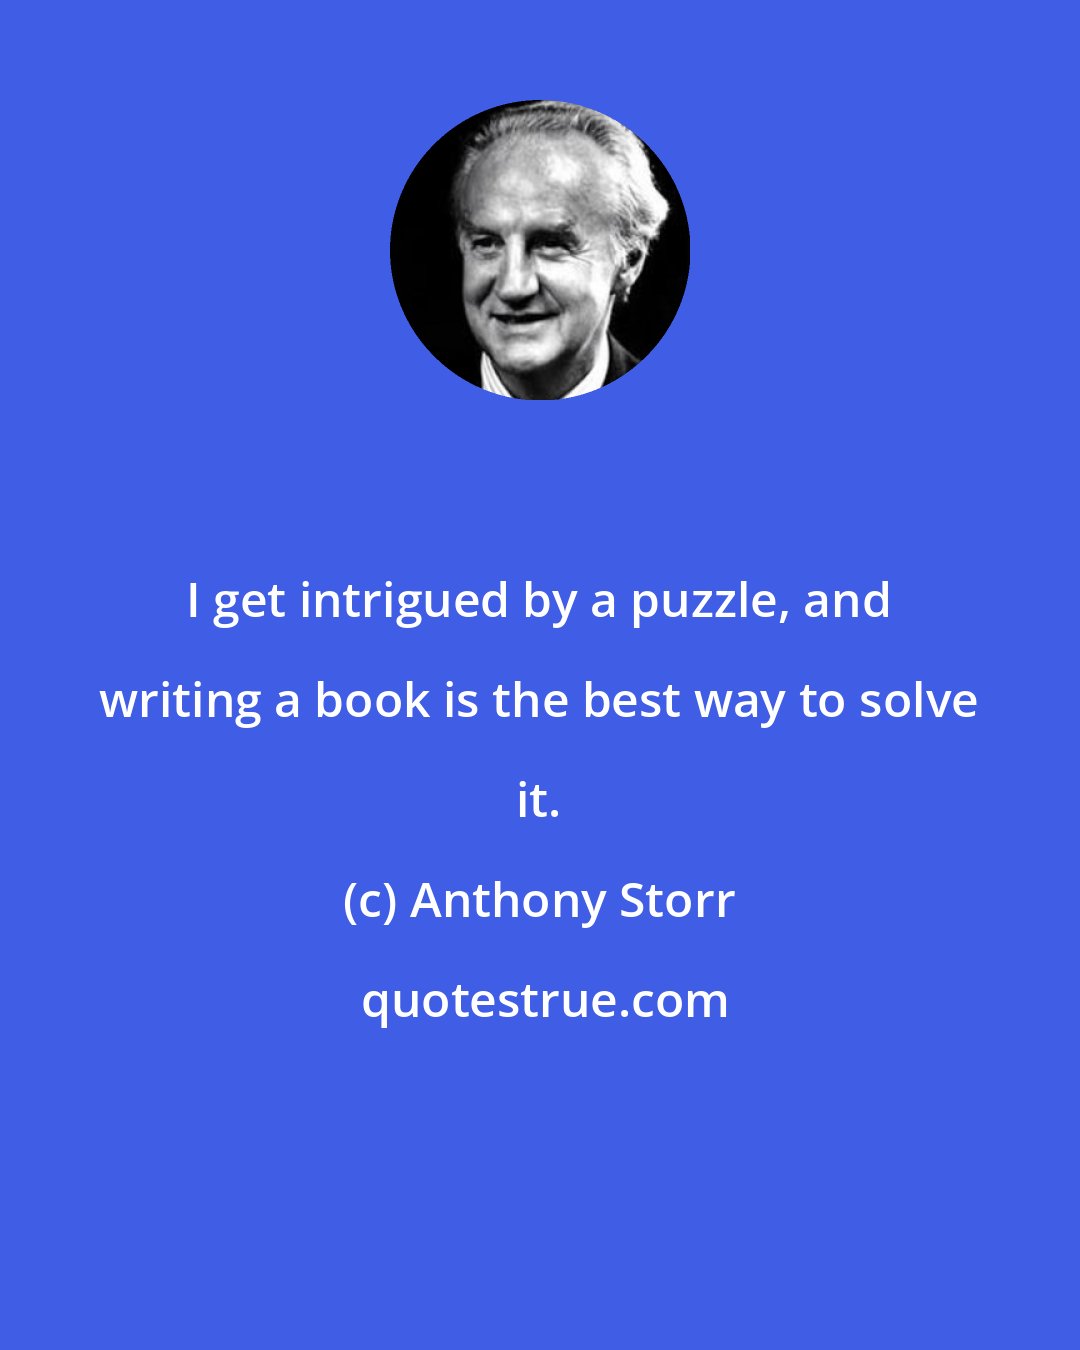 Anthony Storr: I get intrigued by a puzzle, and writing a book is the best way to solve it.